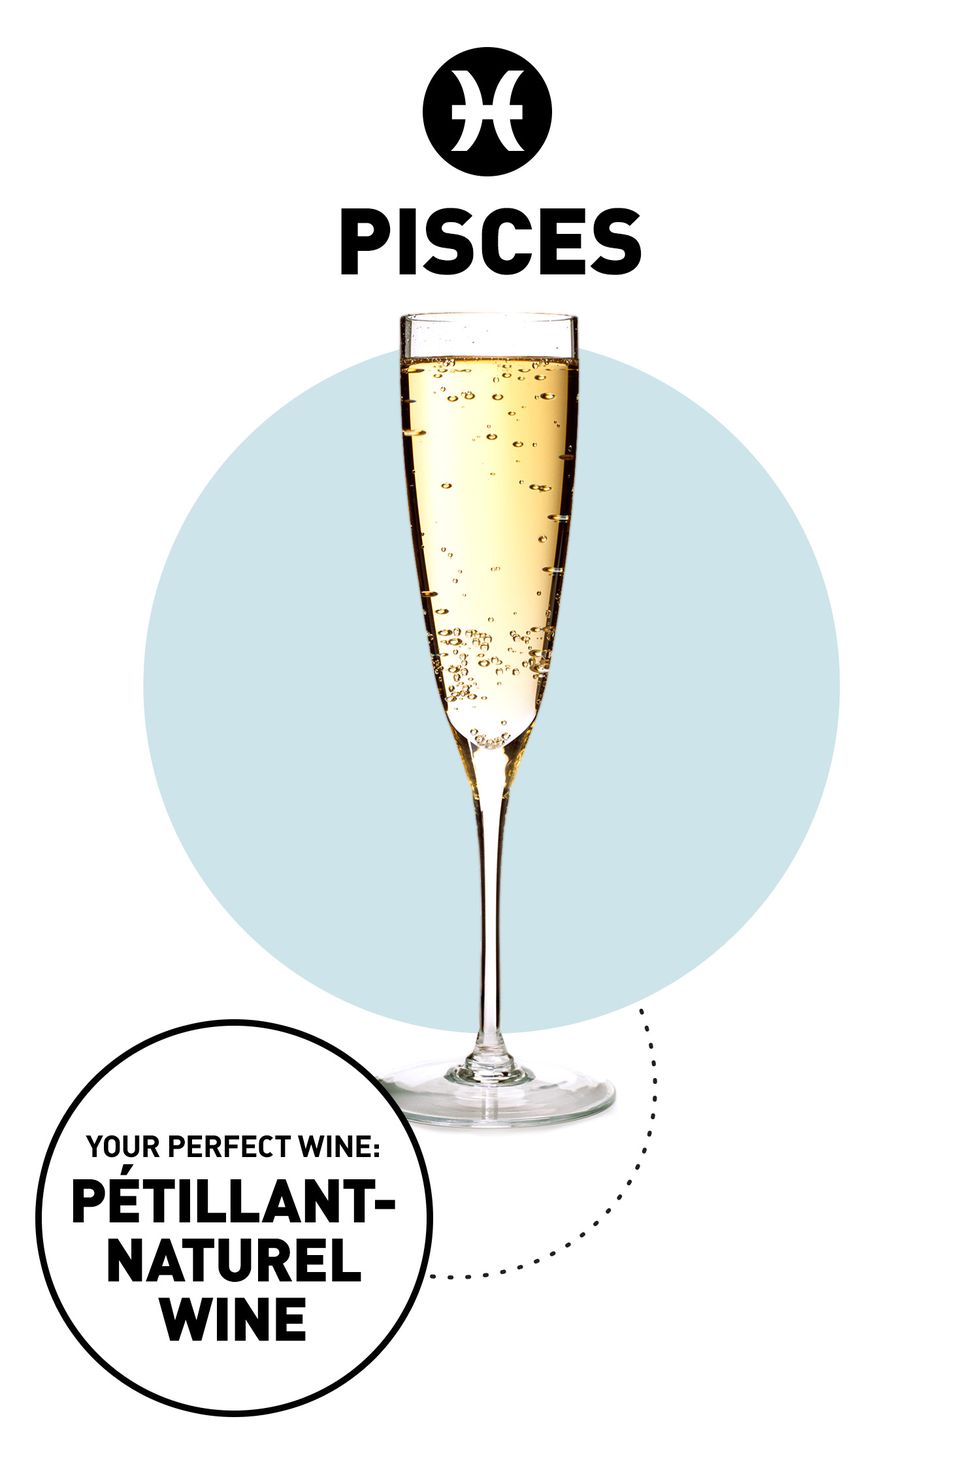 <p><strong>Your Drink:</strong> Pétillant-Naturel wine</p><p><strong>Why: </strong>You hate being labeled or forced into a box; you just do you. That's why your wine keeps people guessing—bubbly and light, it's "Champagne's chiller sister," Ross says. The fizz isn't as aggressive, and it has no added sugars, giving it a zesty, tart flavor that pretty much embodies your fun-loving, free spirit.</p>